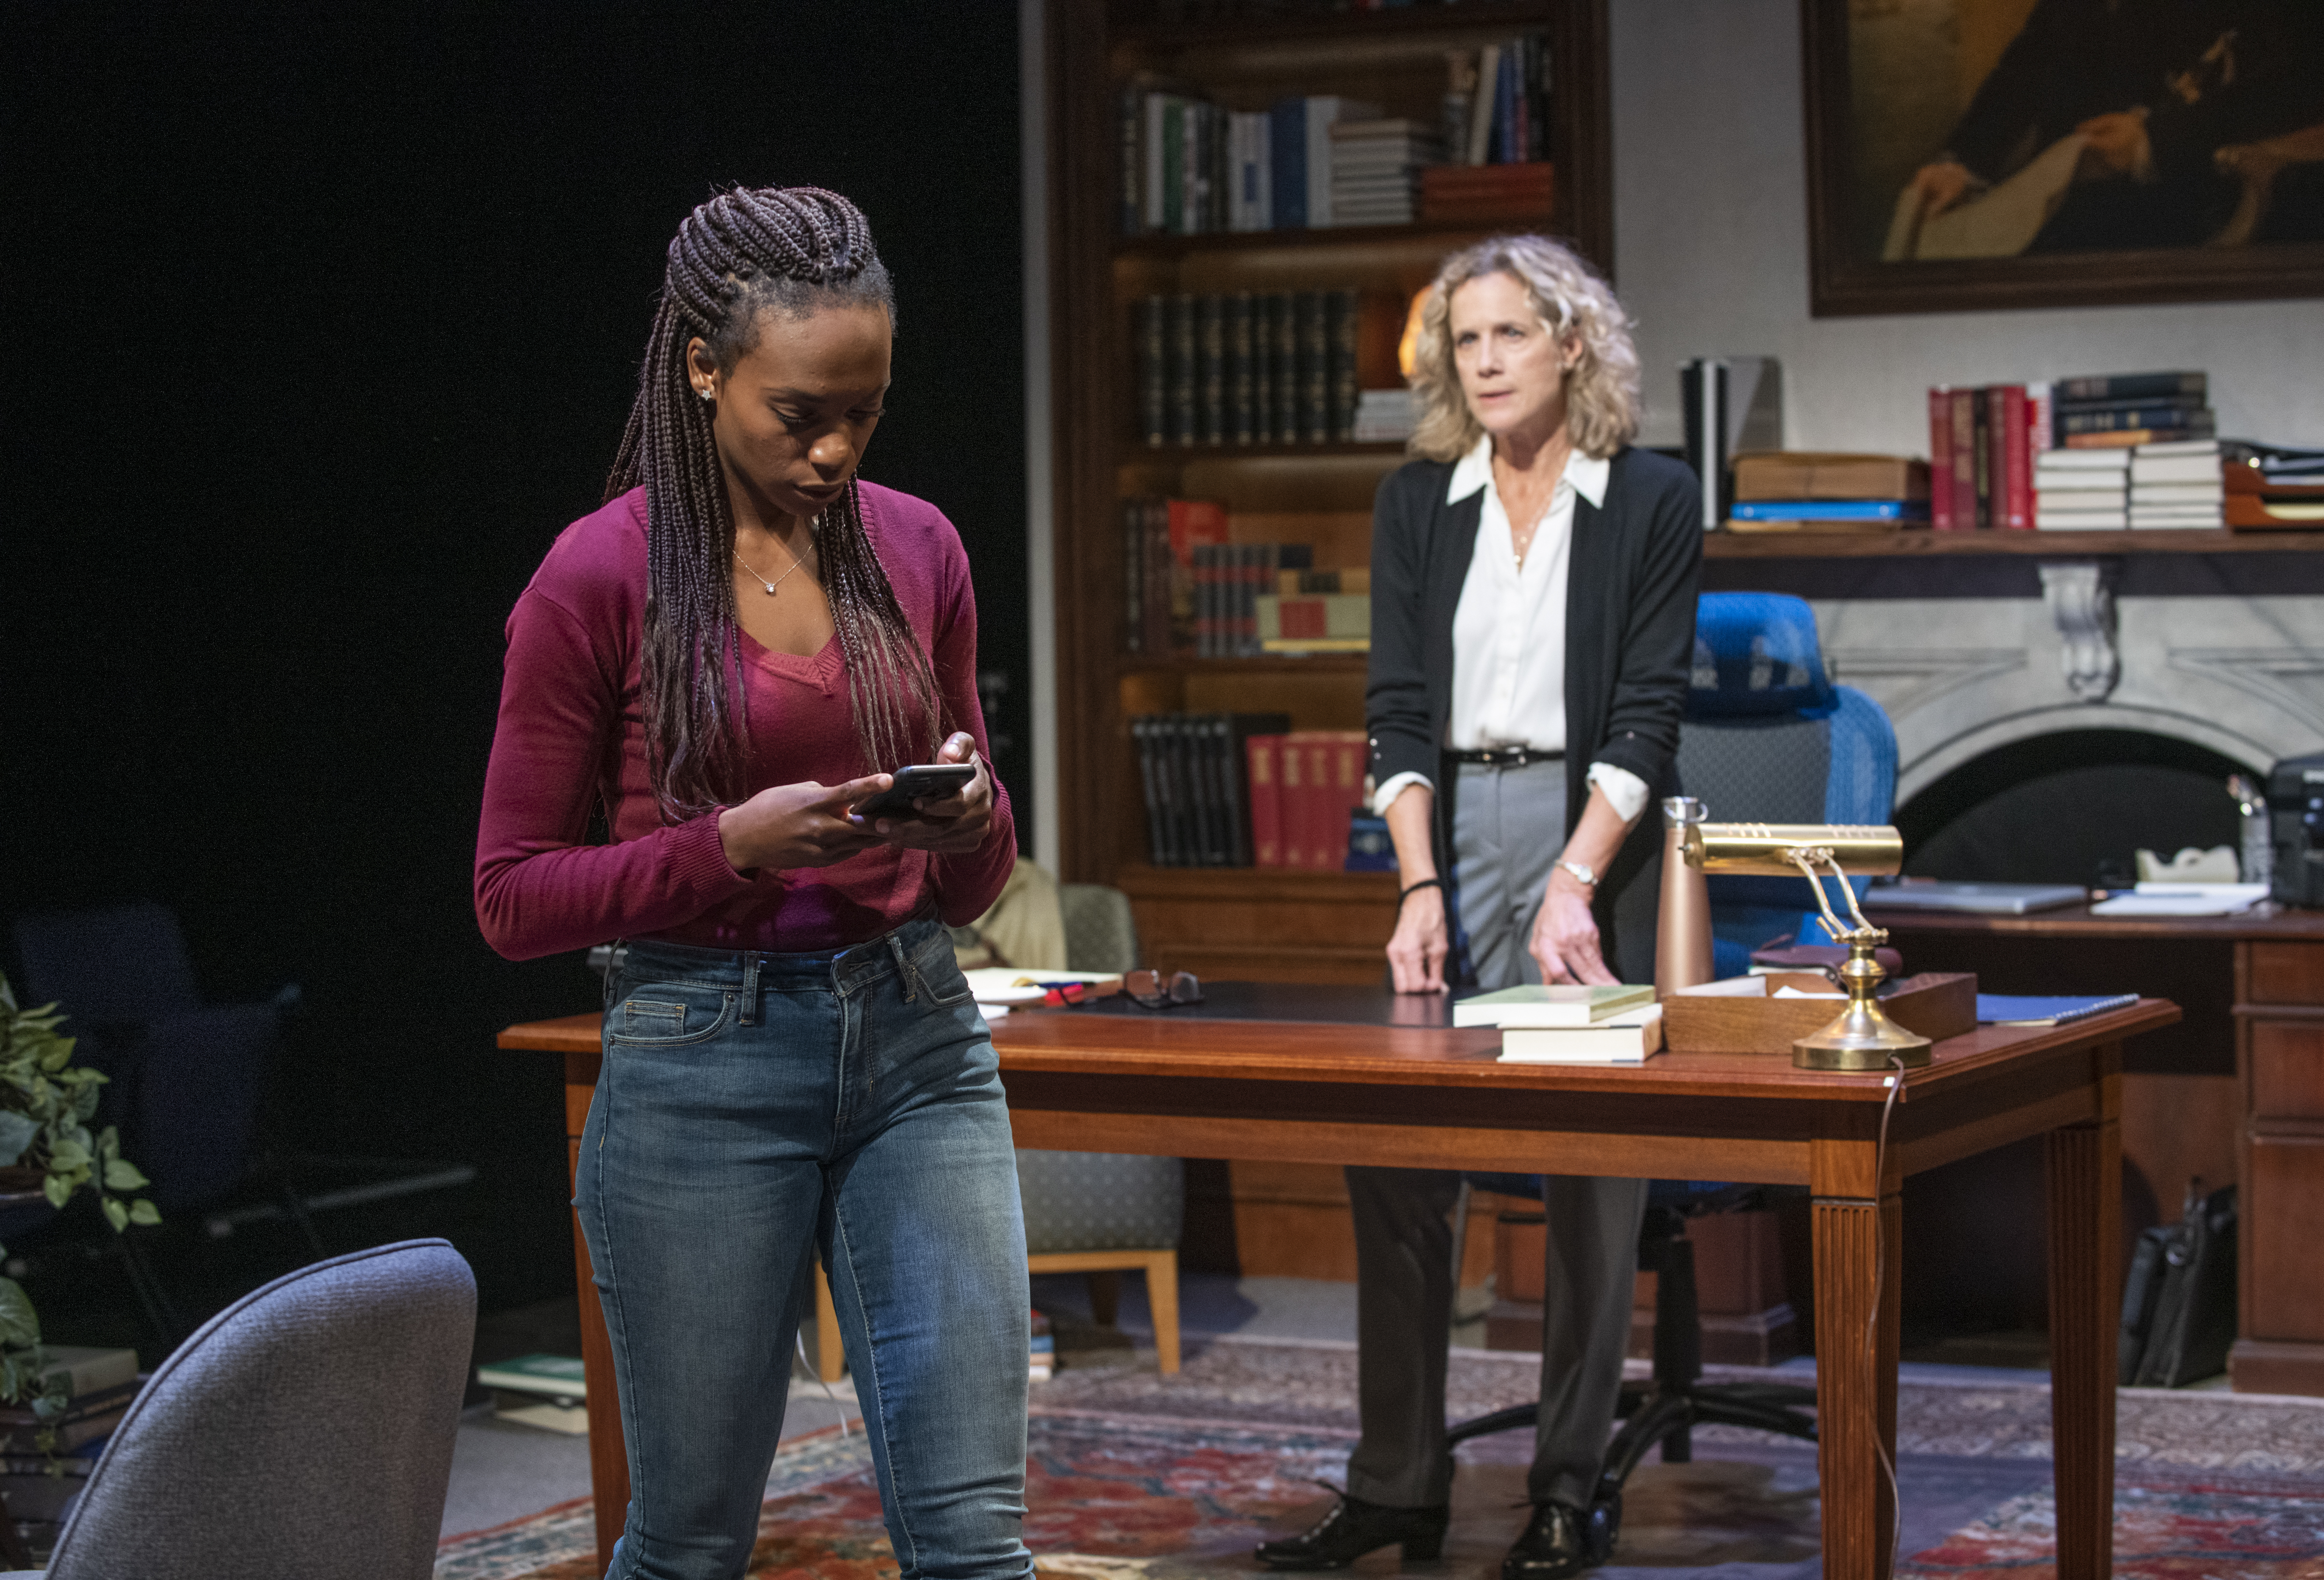 Milwaukee Repertory Theater presents The Niceties in the Stiemke Studio September 25 – November 3, 2019. Left to right: Kimber Sprawl and Kate Levy. Photo by Michael Brosilow.